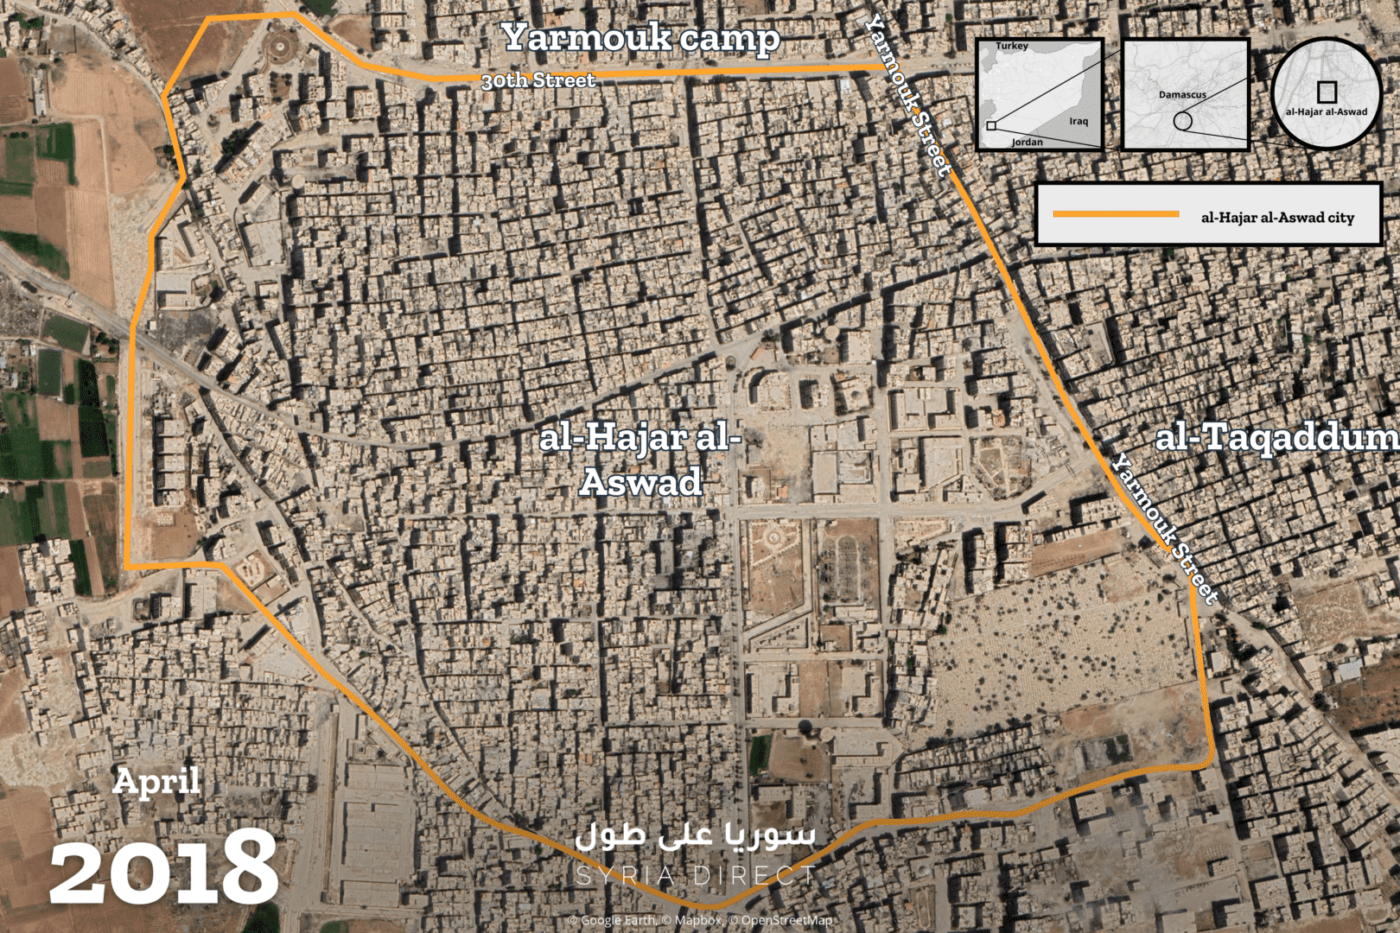 Satellite images of al-Hajar al-Aswad show a greater number of demolished buildings in 2023 compared to 2018, when Damascus retook control of the city from IS (Google Earth/SkyFi/OpenStreetMap/ Mapbox/Syria Direct)